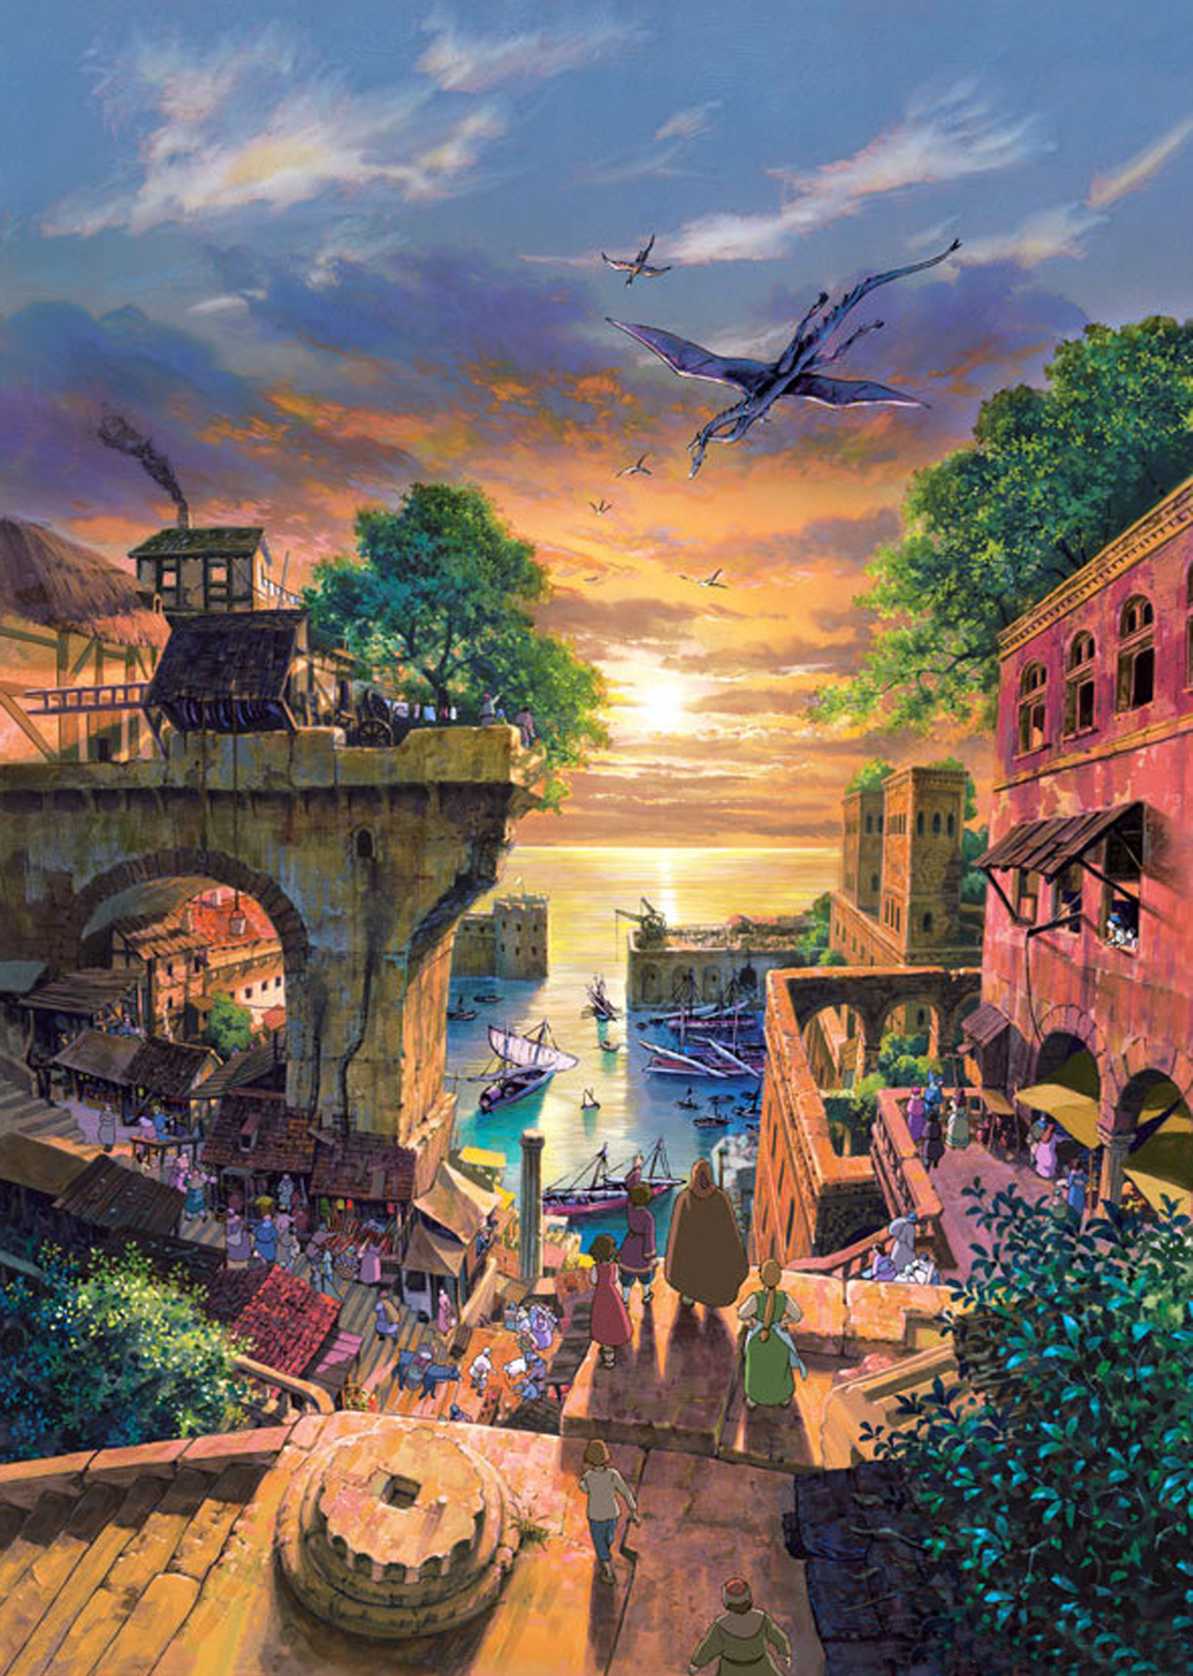 <em>Tales From Earthsea</em>, animated film by Goro Miyazaki after Ursula K. Le Guin's work (2006)